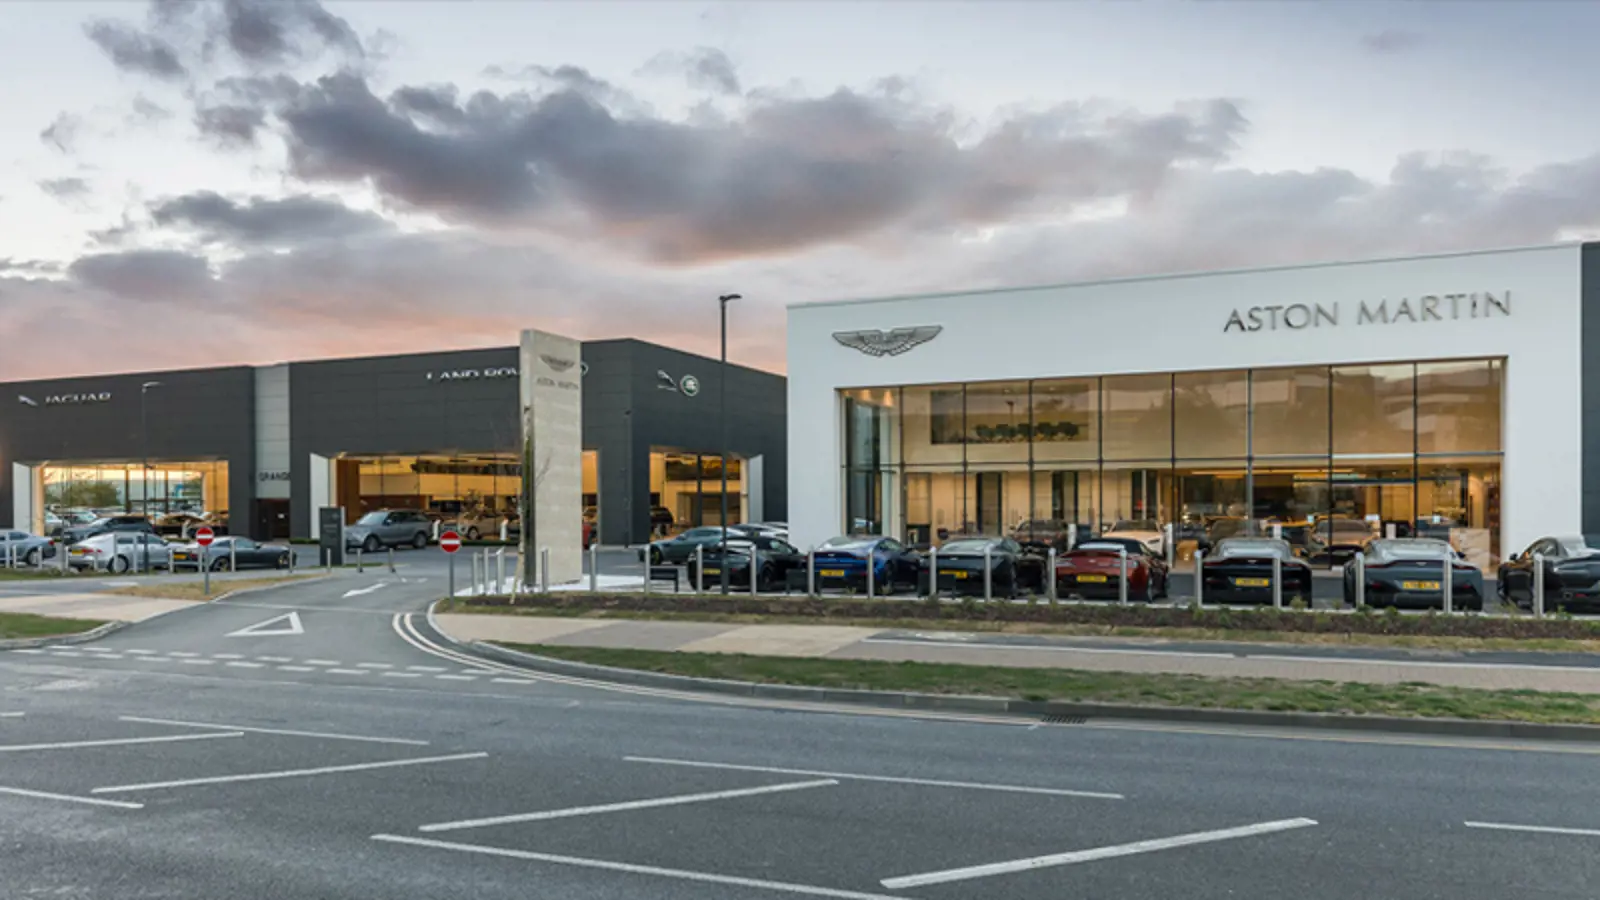 About Grange Motors: Engage With Luxury